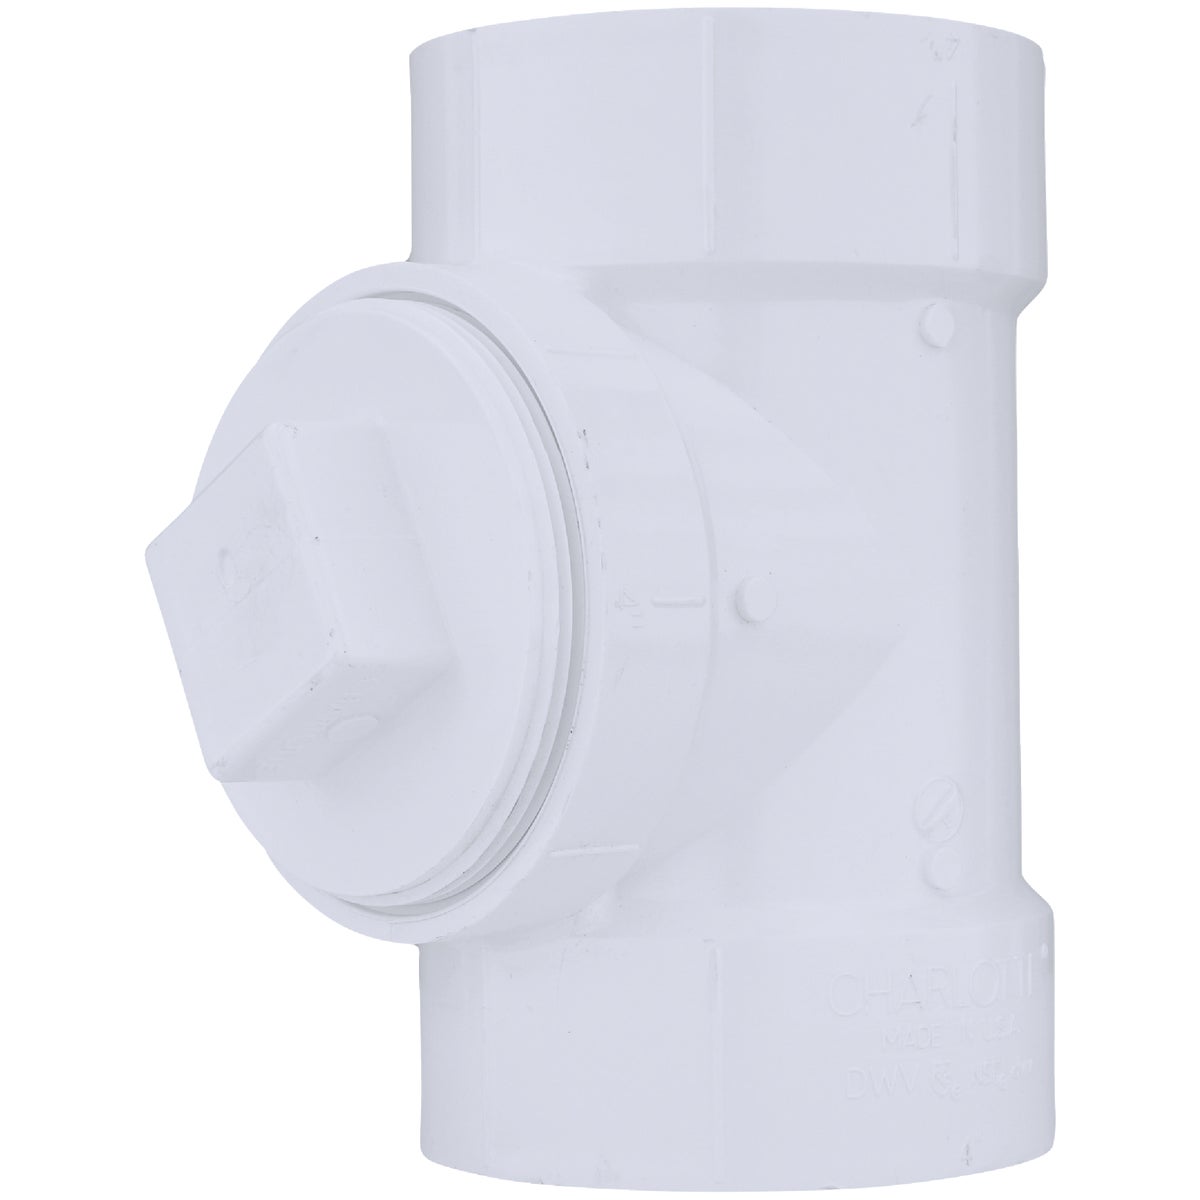 Charlotte Pipe 4 In. Test PVC Tee with Toe Saver Plug